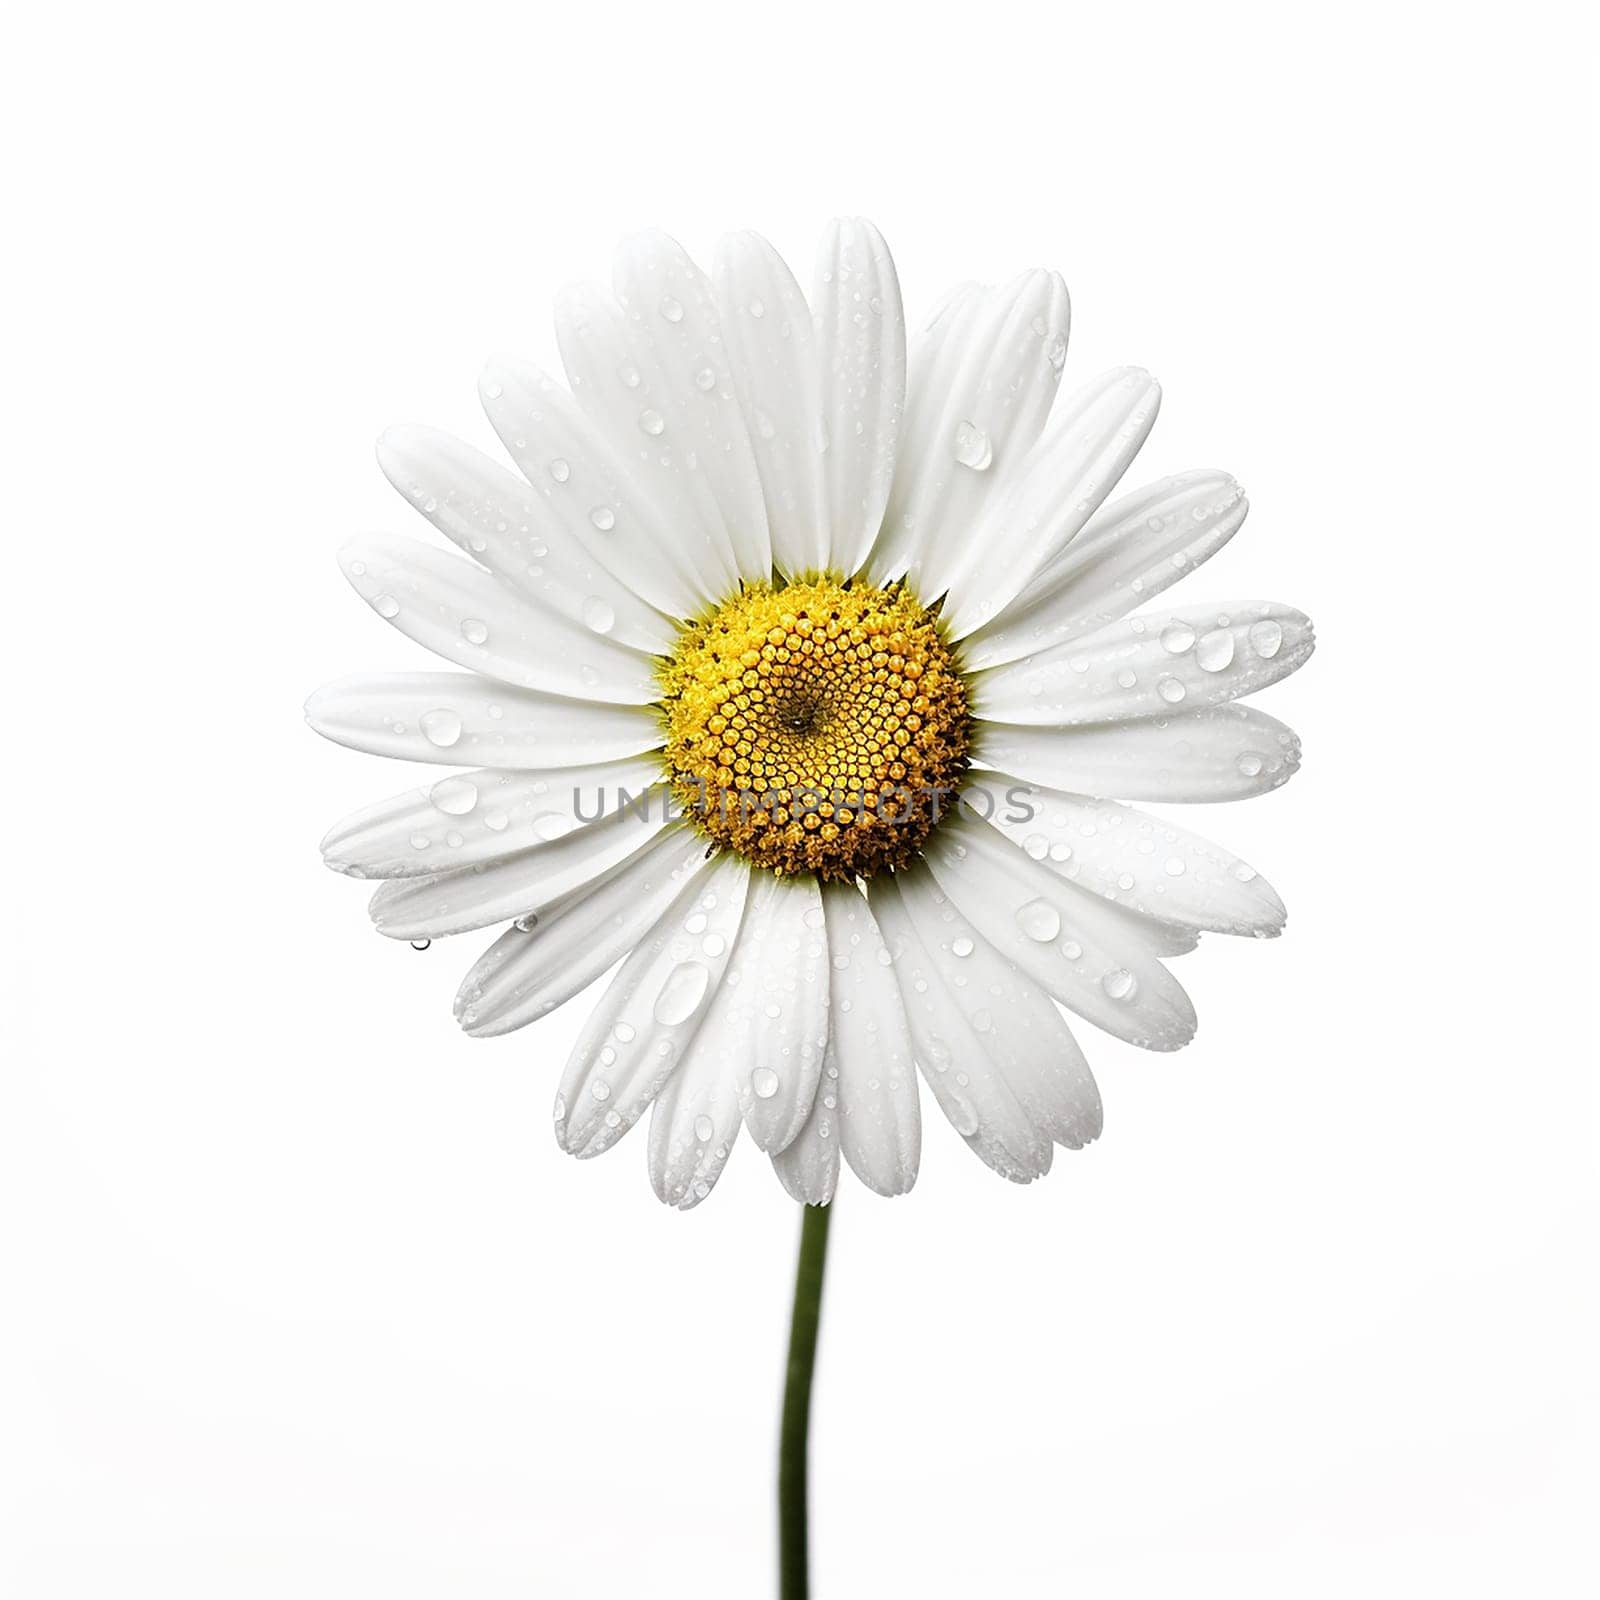 Close-up of a white daisy with water droplets against a white background